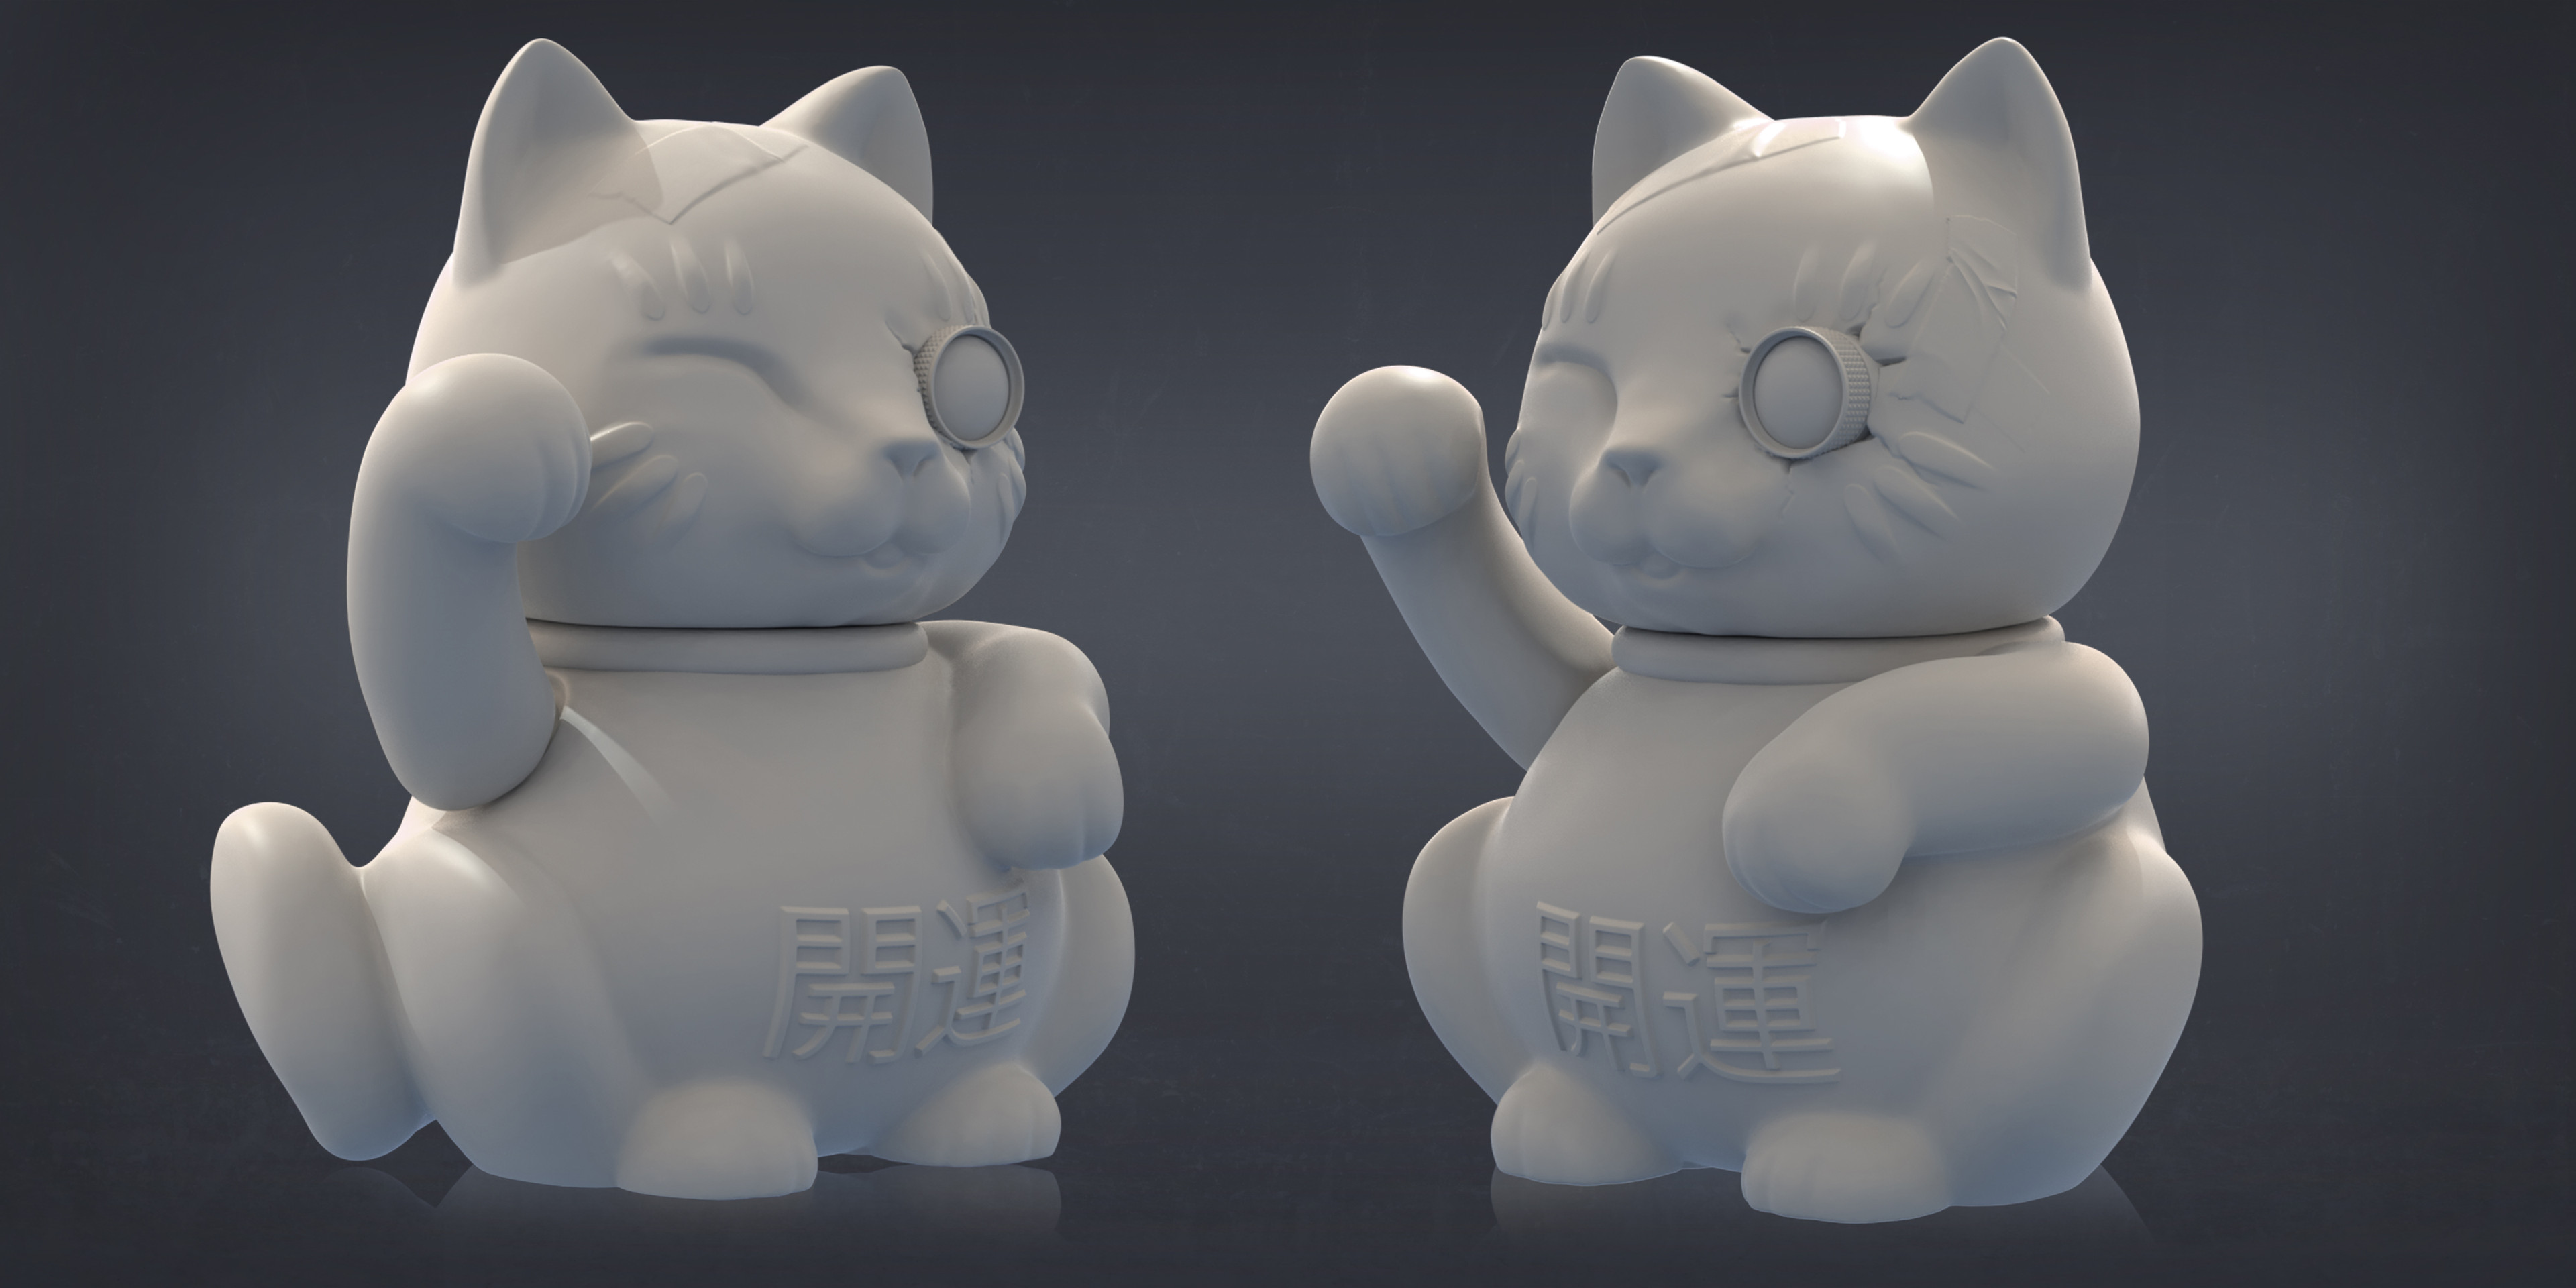 Part of a cyberpunk asset scene, still in the works. Idea was to make a lucky cat into a webcam. Supposed to look like its crudely cut in. Based of a few reference lucky cats I found online.